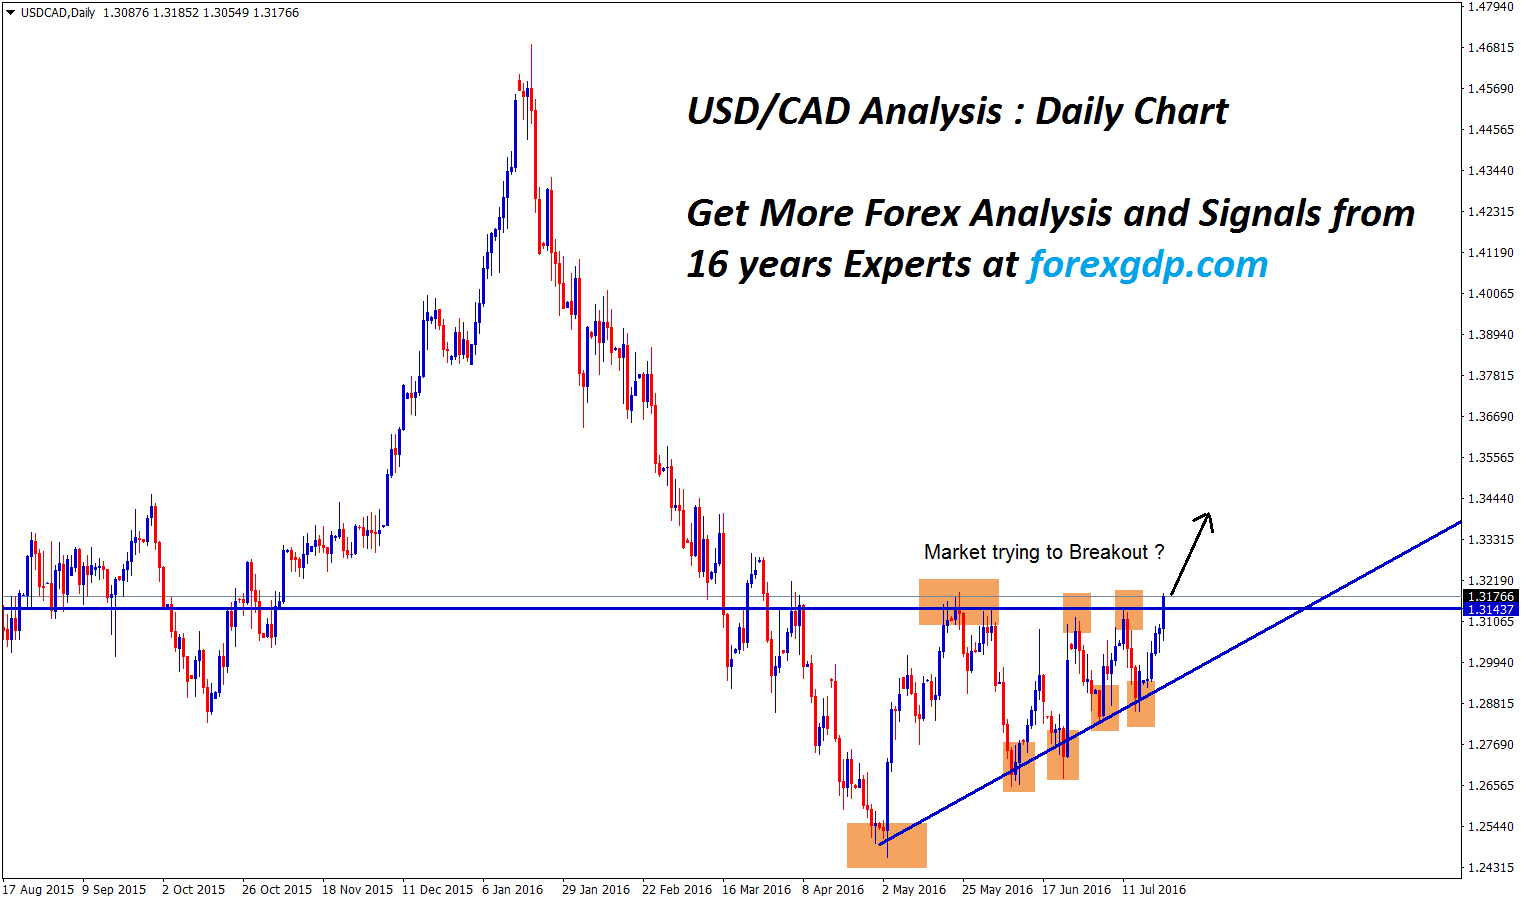 USDCAD Analysis ascending channel breakout